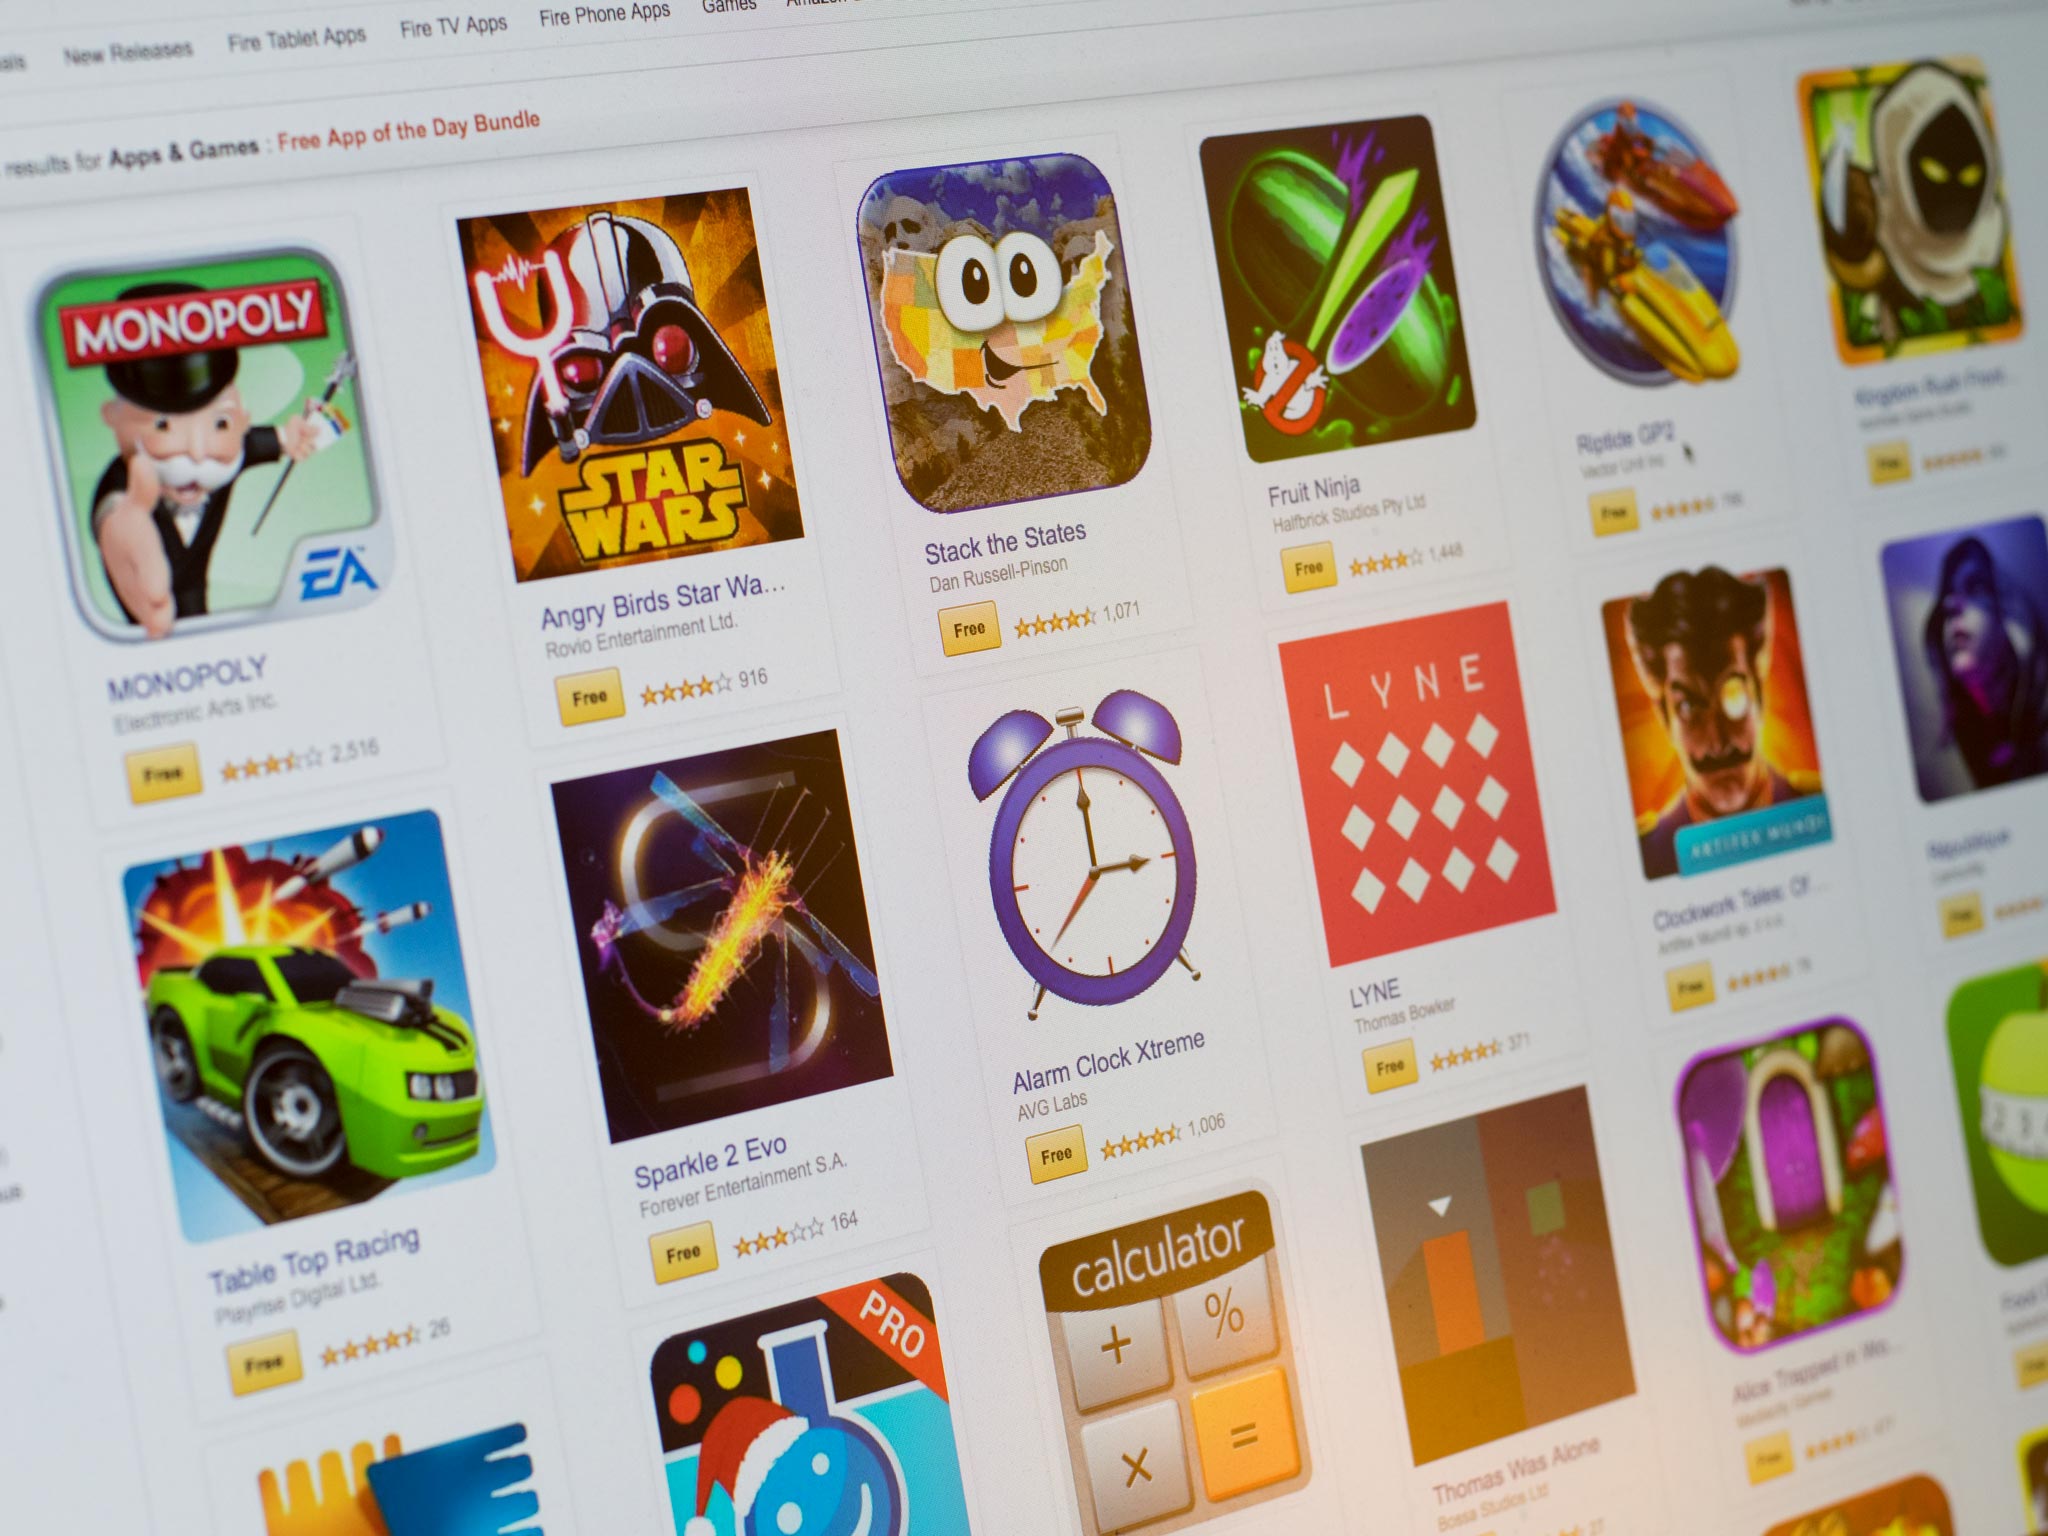 Get up to 10 worth of apps for free with Amazon's Free App of the Day bundle